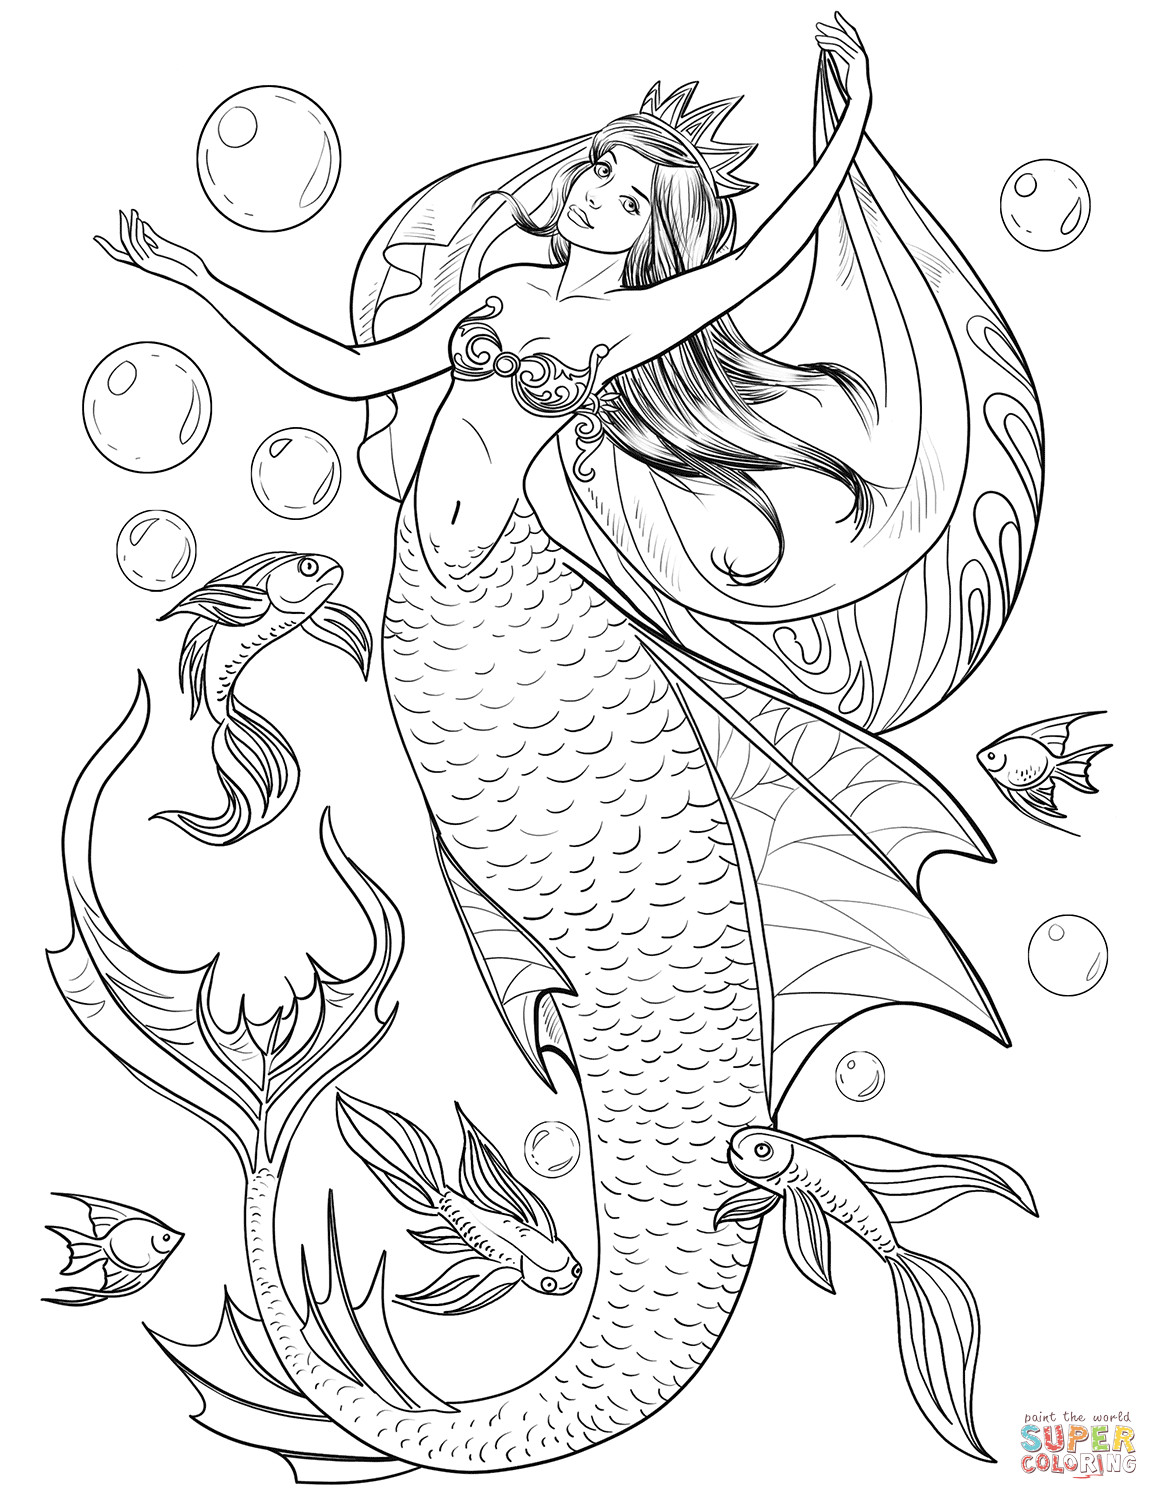 the-best-ideas-for-realistic-mermaid-coloring-pages-for-adults-home